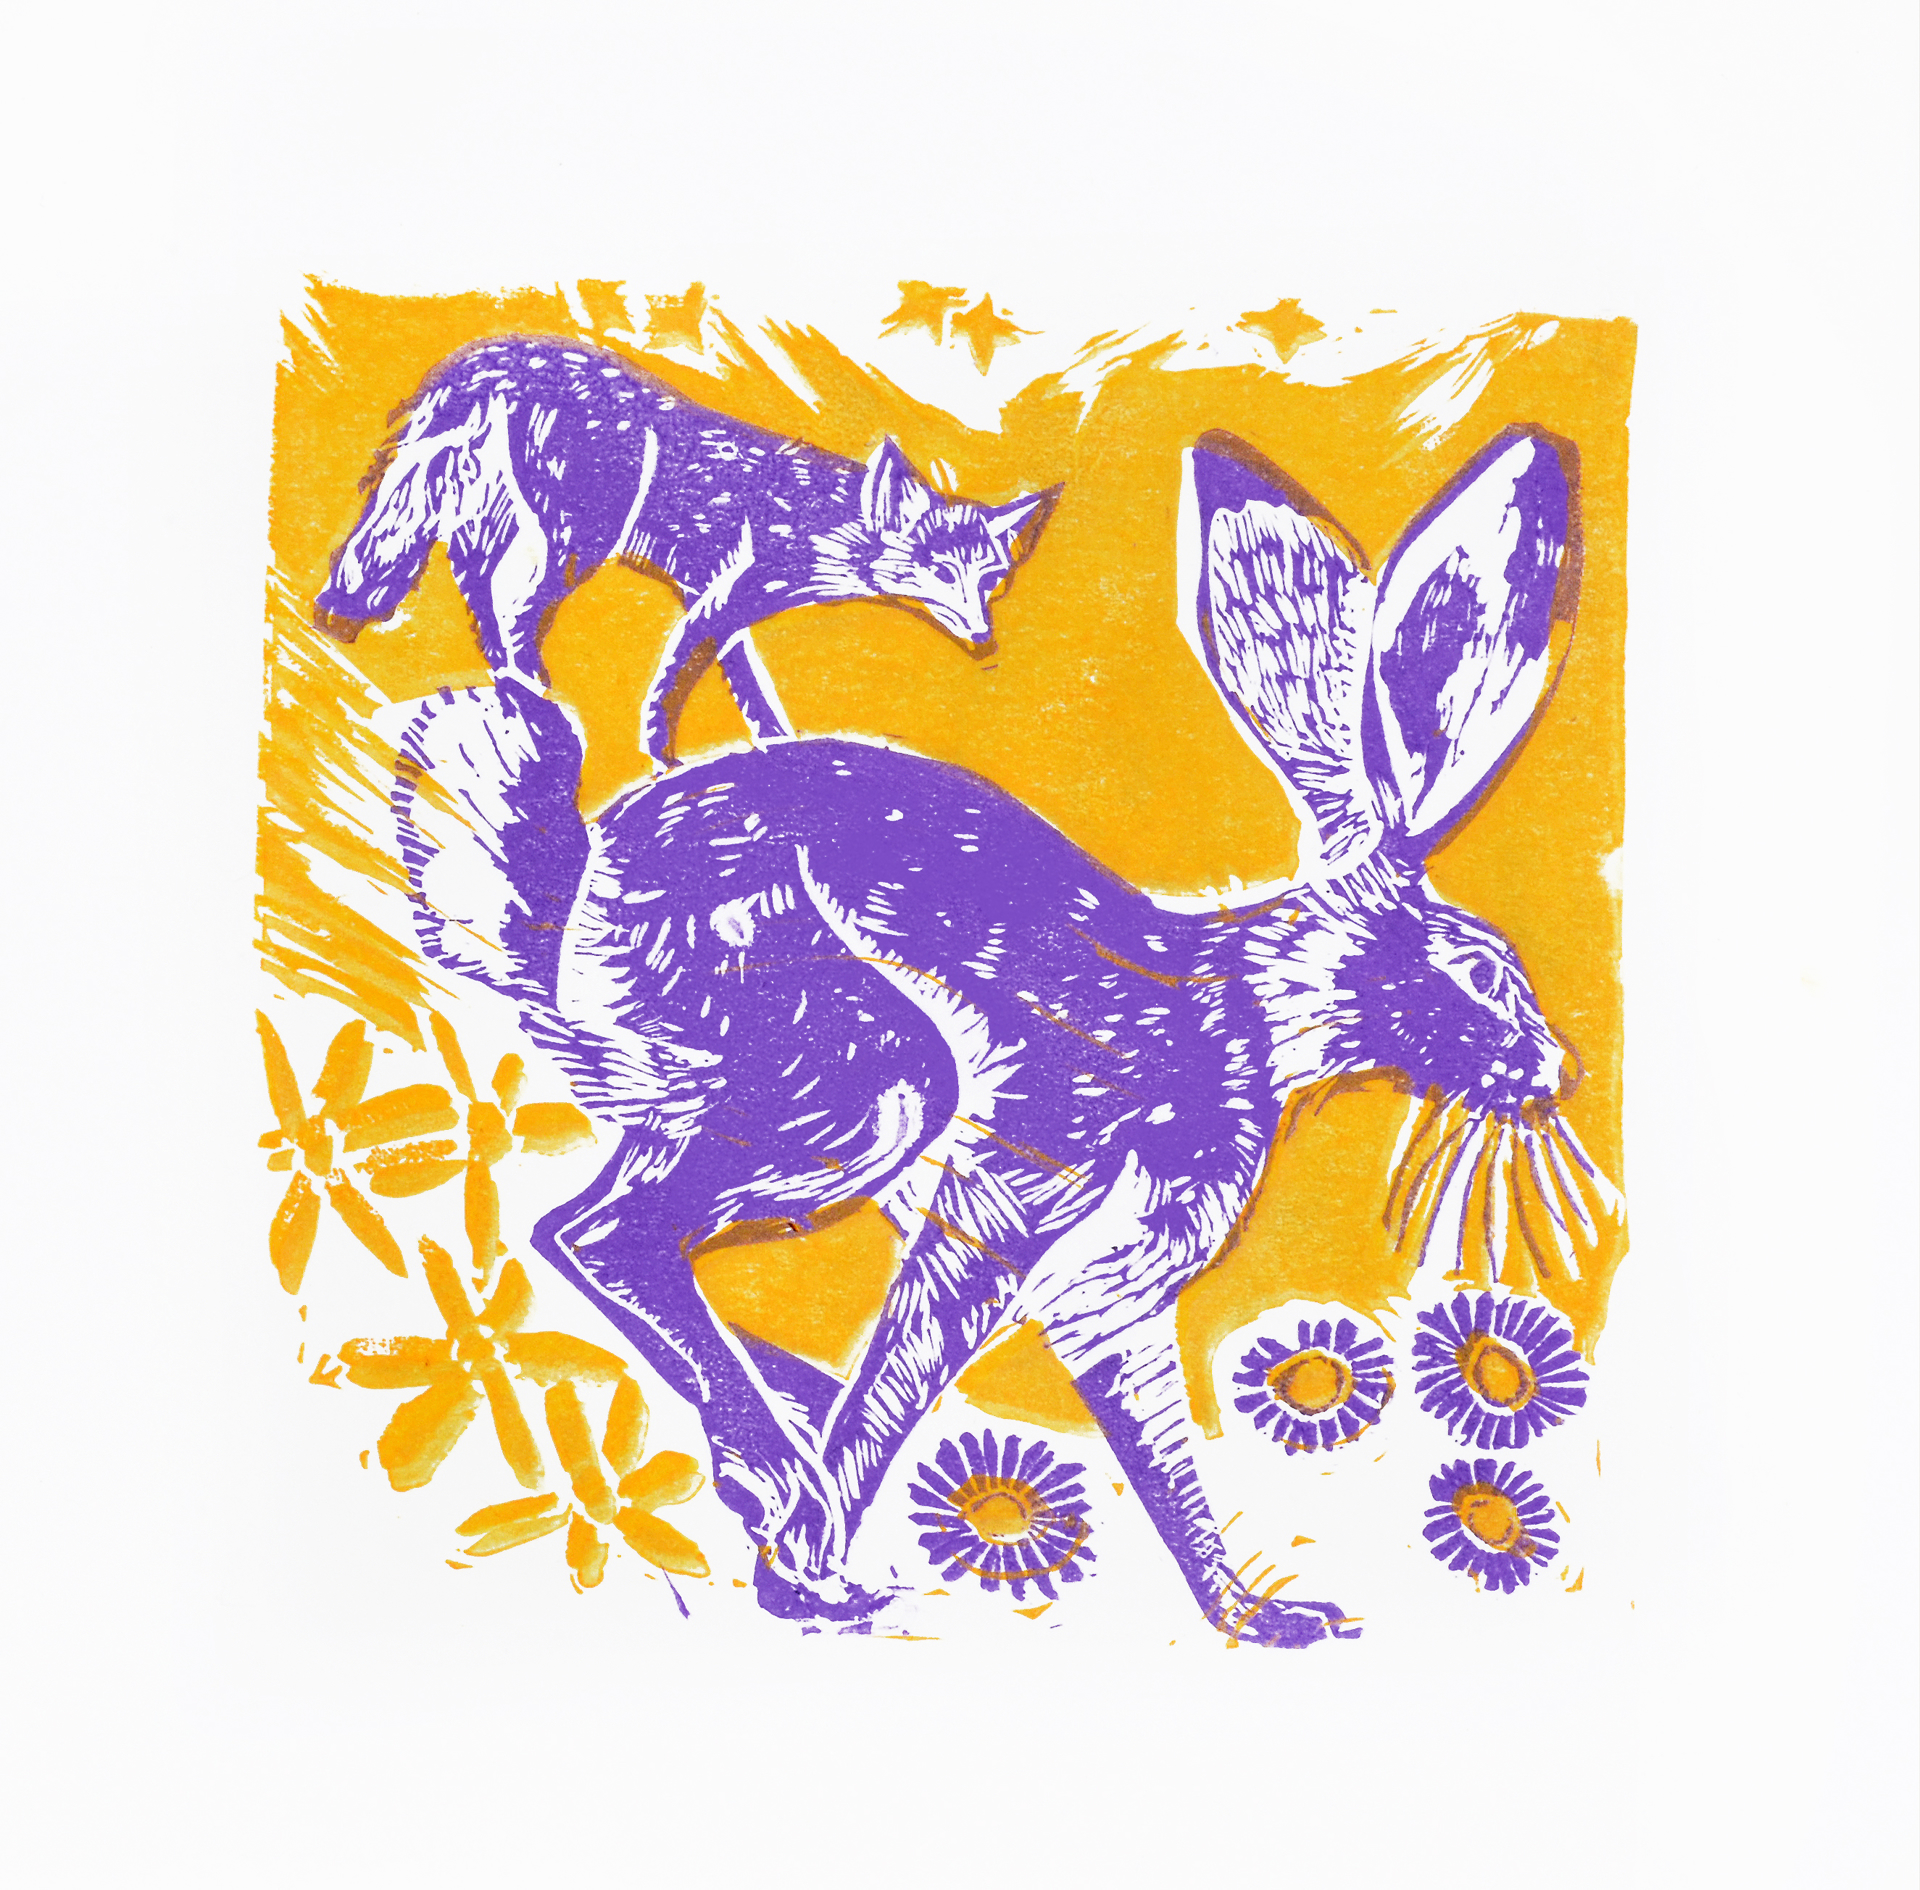 A Jackrabbit, Coyote, Asters and Ragwort Flowers by Kat Kinnick